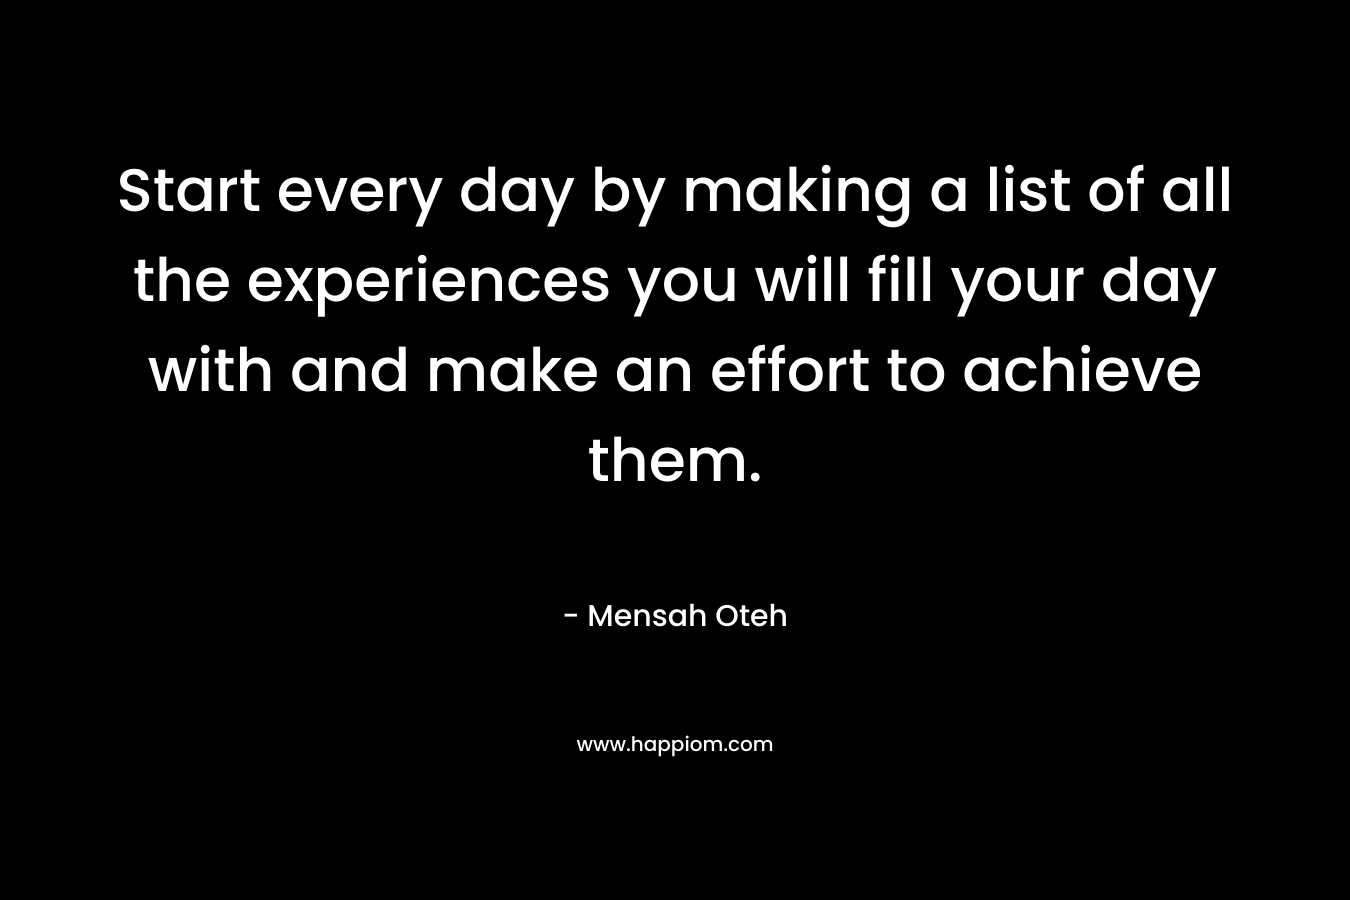 Start every day by making a list of all the experiences you will fill your day with and make an effort to achieve them.